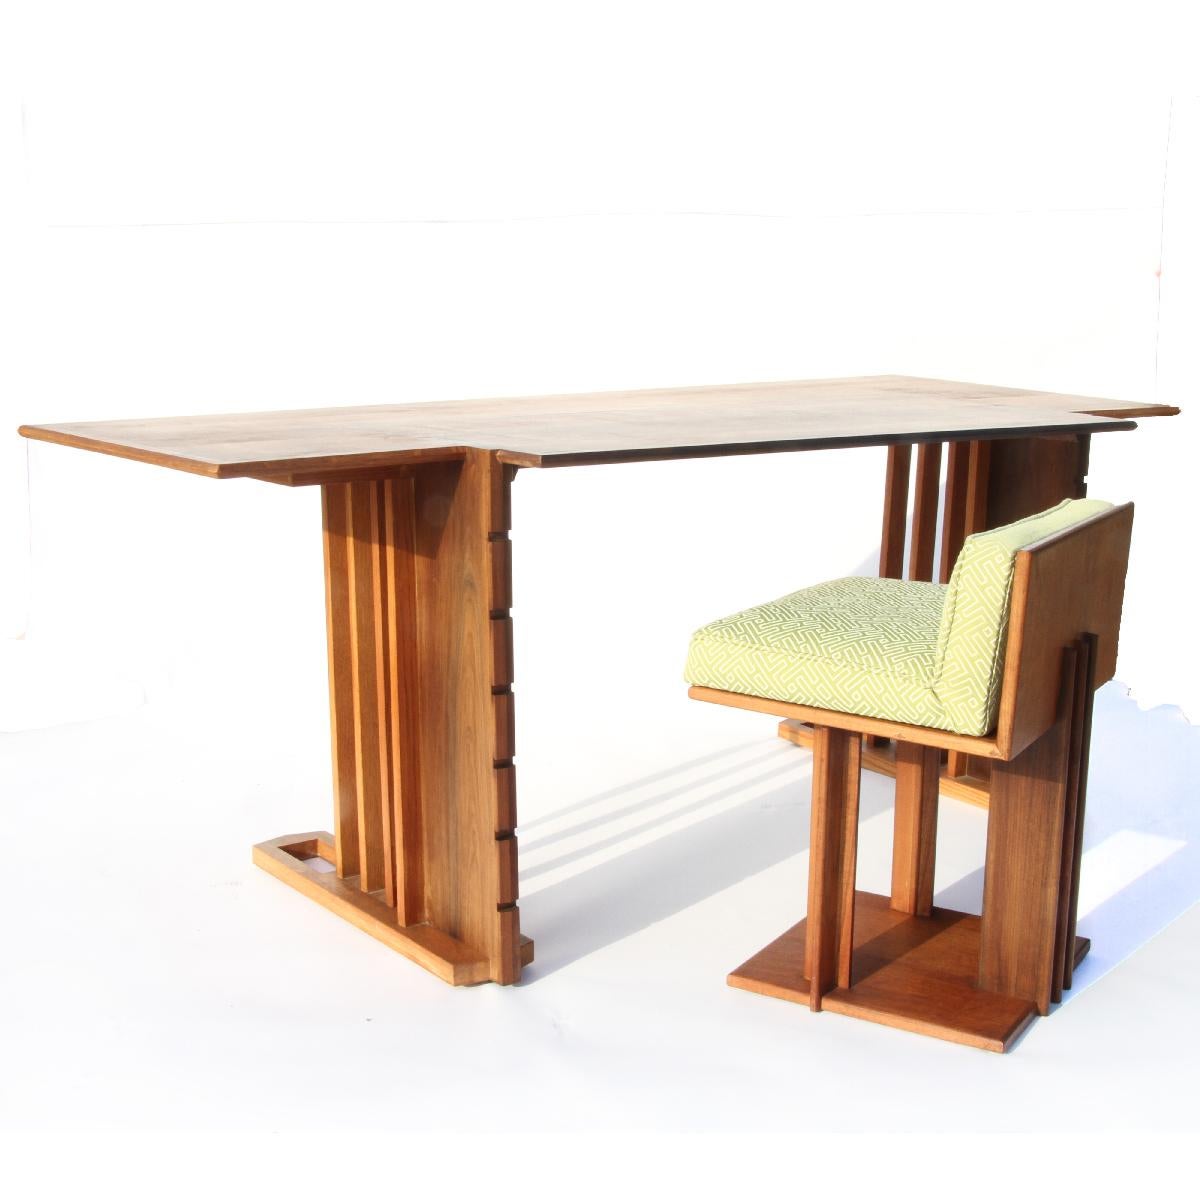 Very rare Unison desk and chair by Frank Lloyd Wright designed for the second owners of The Derby House in 1947. Desk is comprised of various woods, cherry, oak and walnut.  